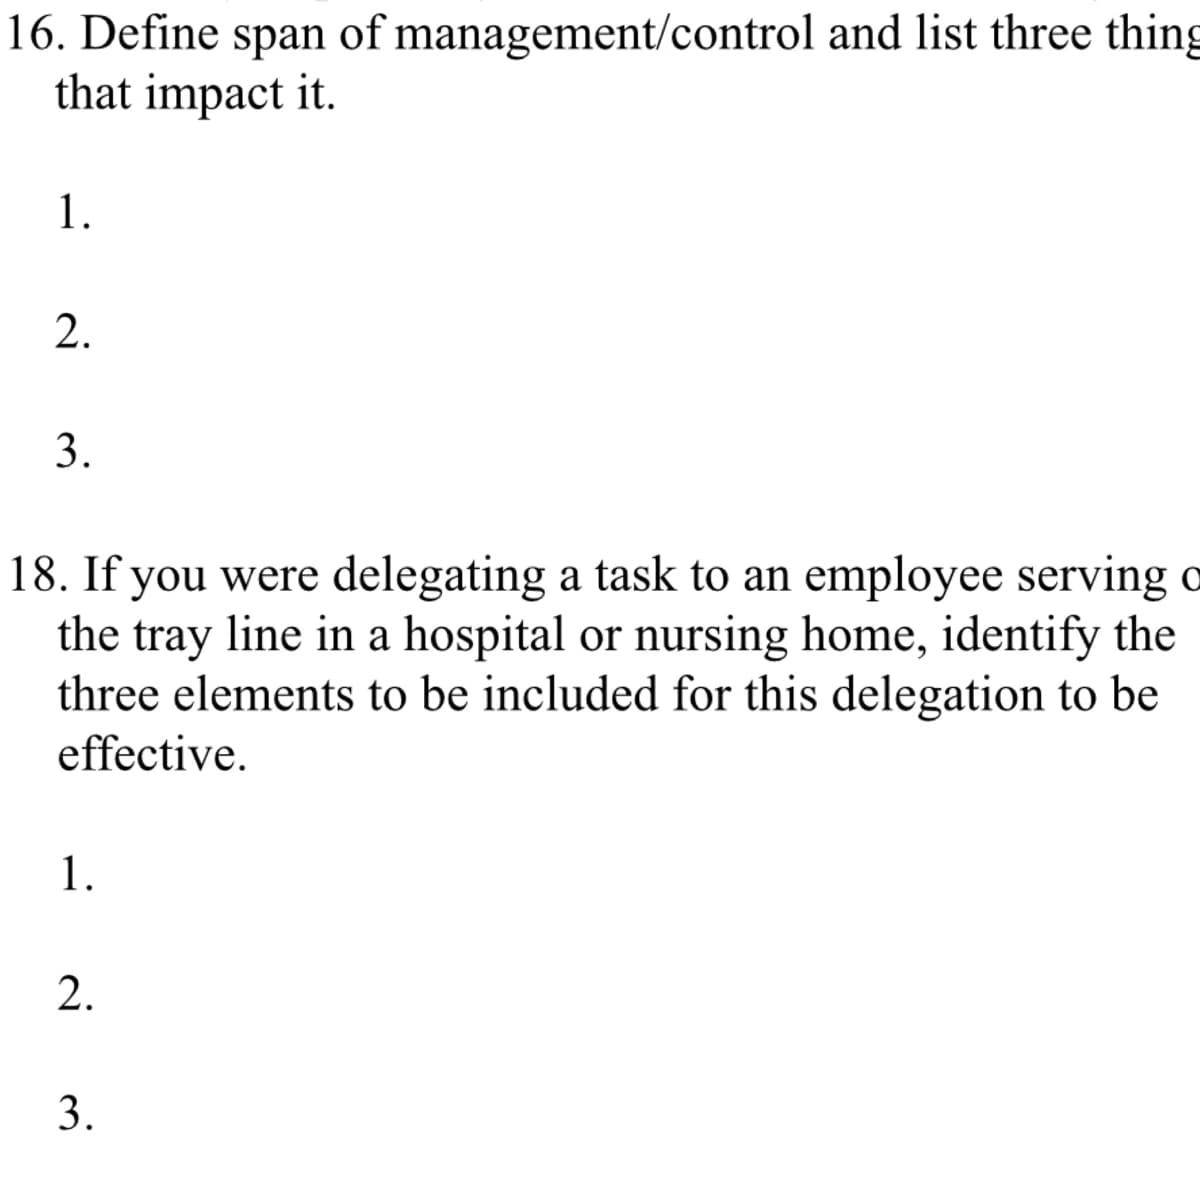 16. Define span of management/control and list three thing
that impact it.
1.
2.
3.
18. If you were delegating a task to an employee serving o
the tray line in a hospital or nursing home, identify the
three elements to be included for this delegation to be
effective.
1.
2.
3.